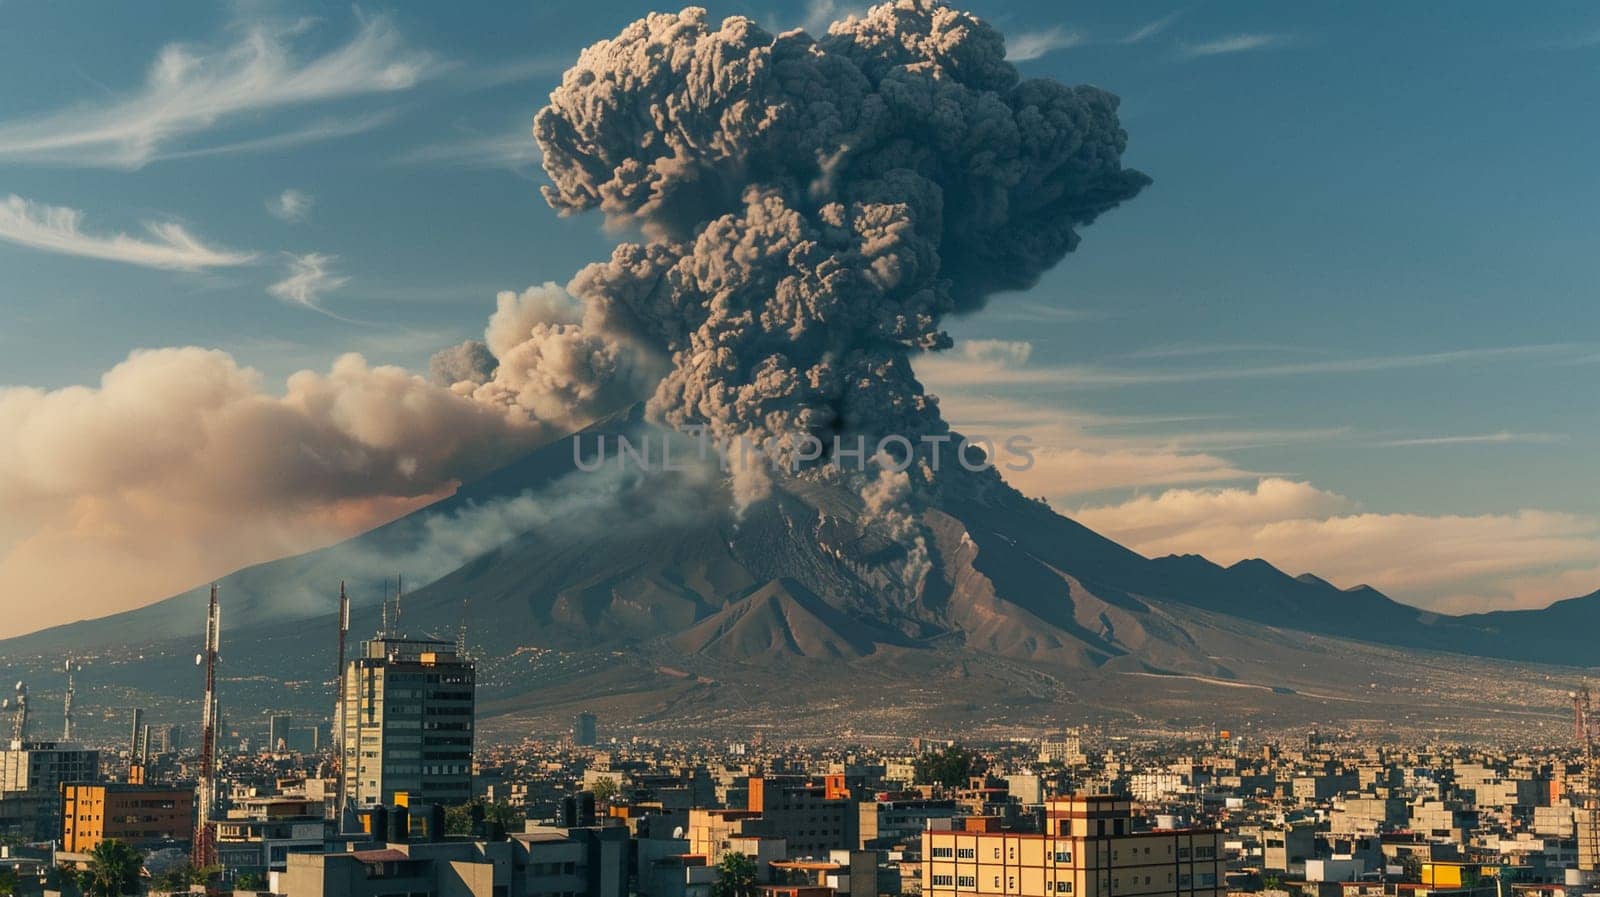 Majestic volcanic eruption dominates city horizon during colorful sunset. Urban landscape faces nature's mighty power. Dramatic, alarming scene captures urban vulnerability contrast natural force